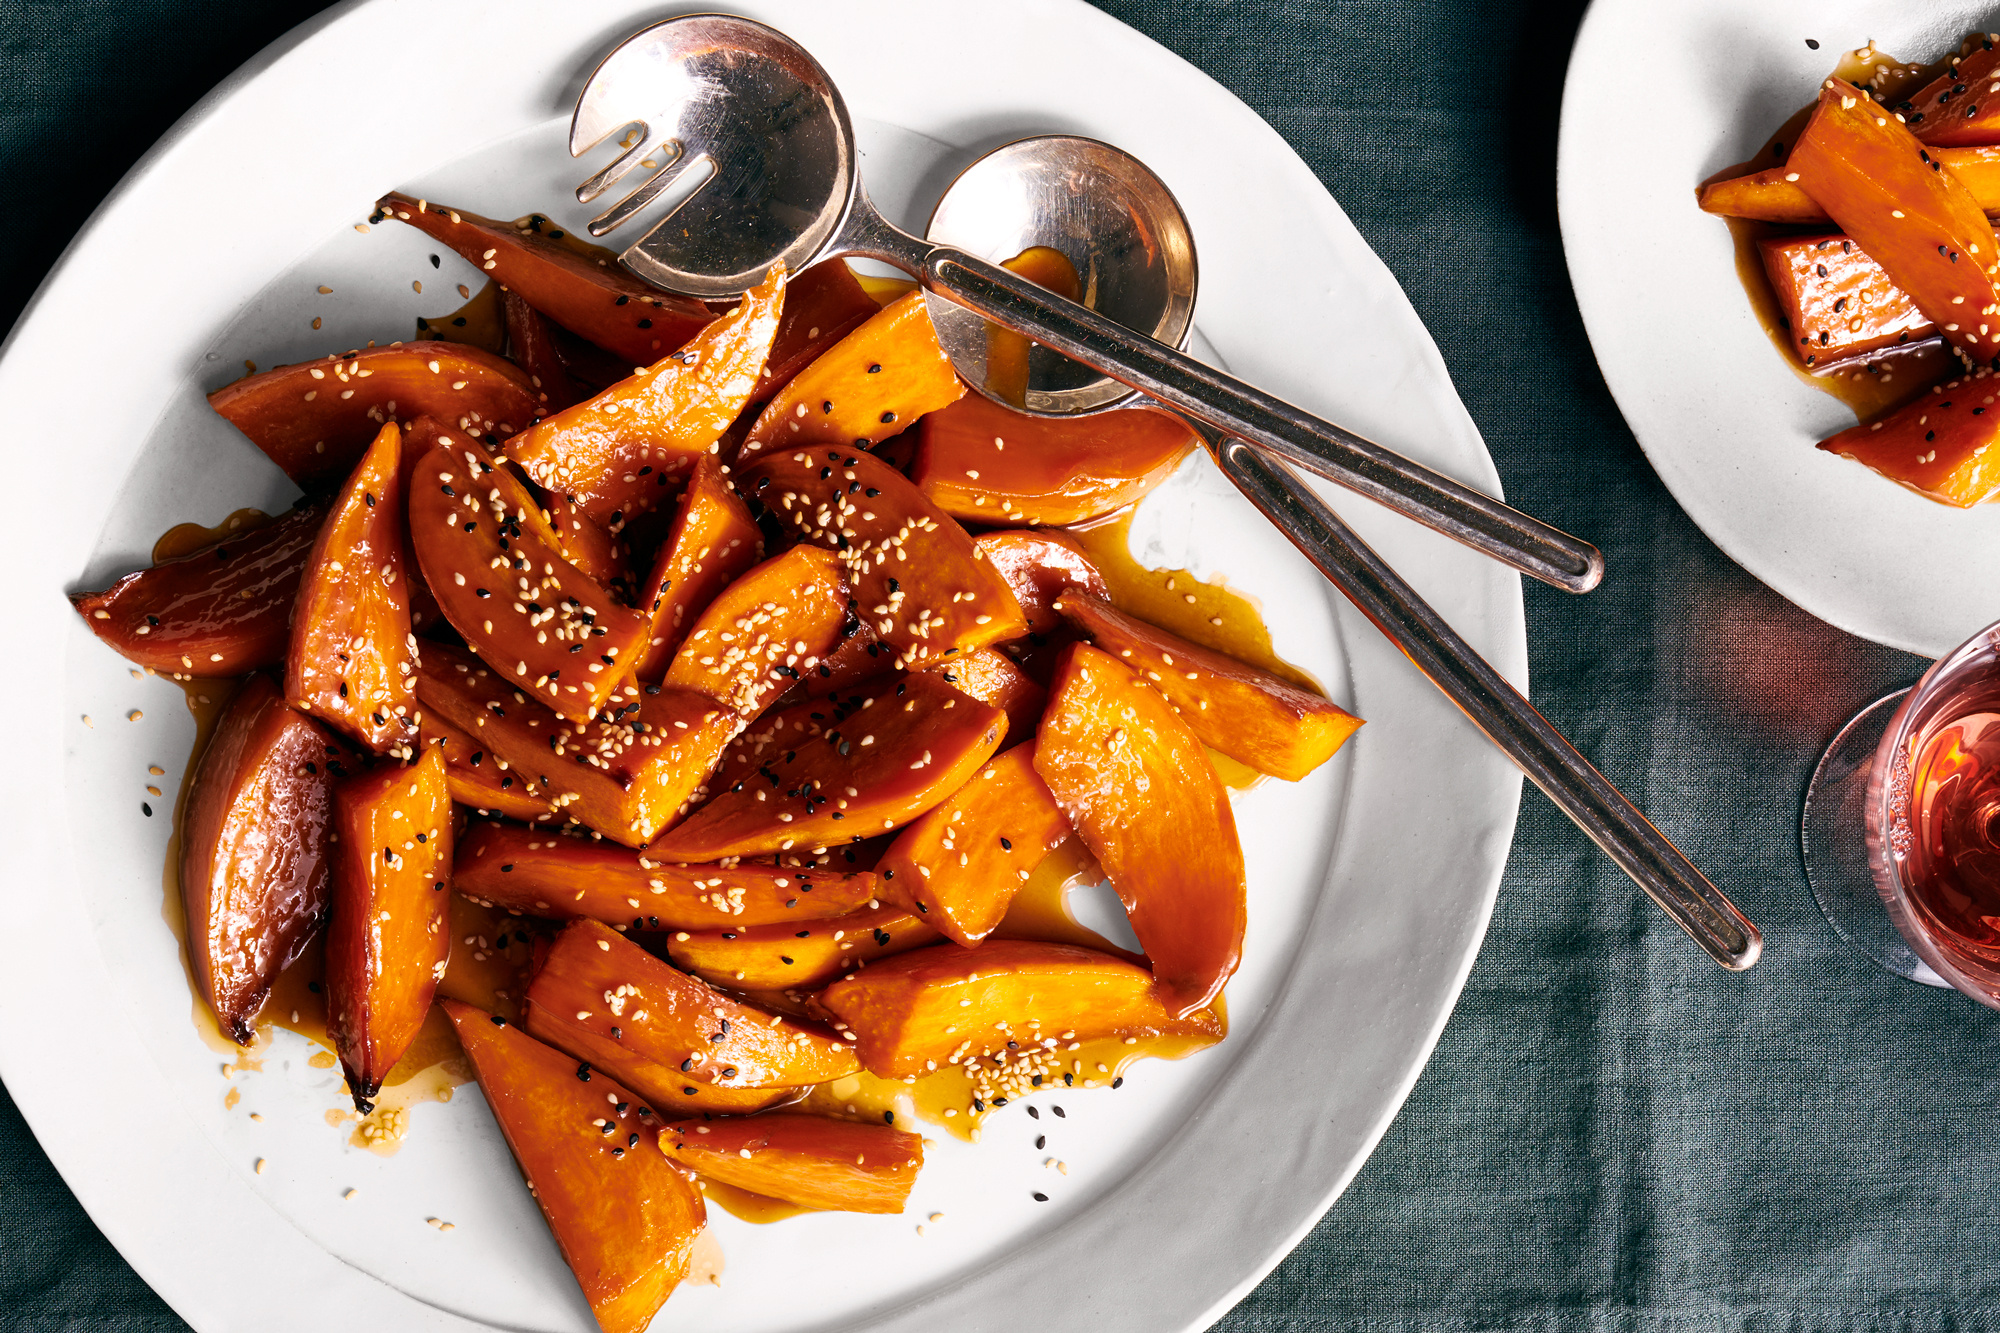 Savory glazed sweet potatoes, Nutty sesame seeds, Justin Chapple's recipe, Delicious food and wine pairing, 2000x1340 HD Desktop